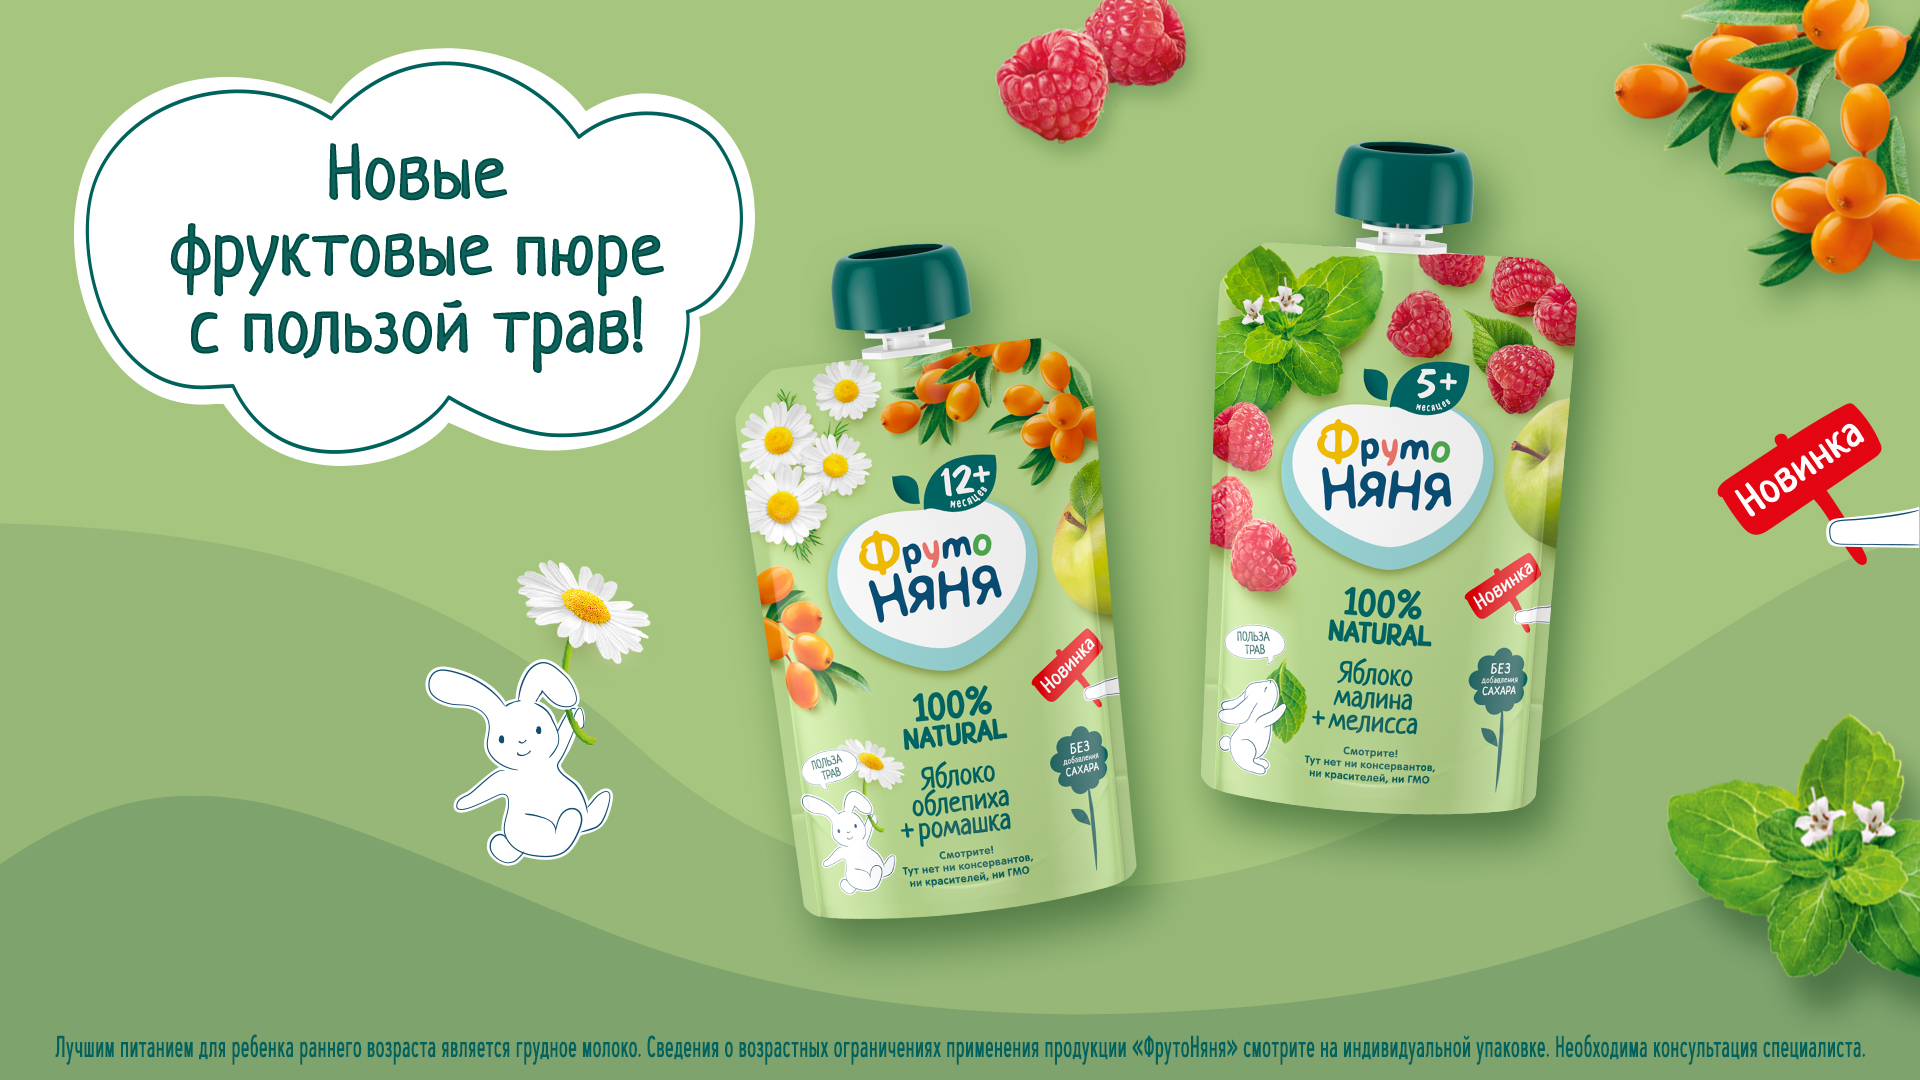 Meet Our All-New Products – Fruit Purees with Natural Herbal Extracts!